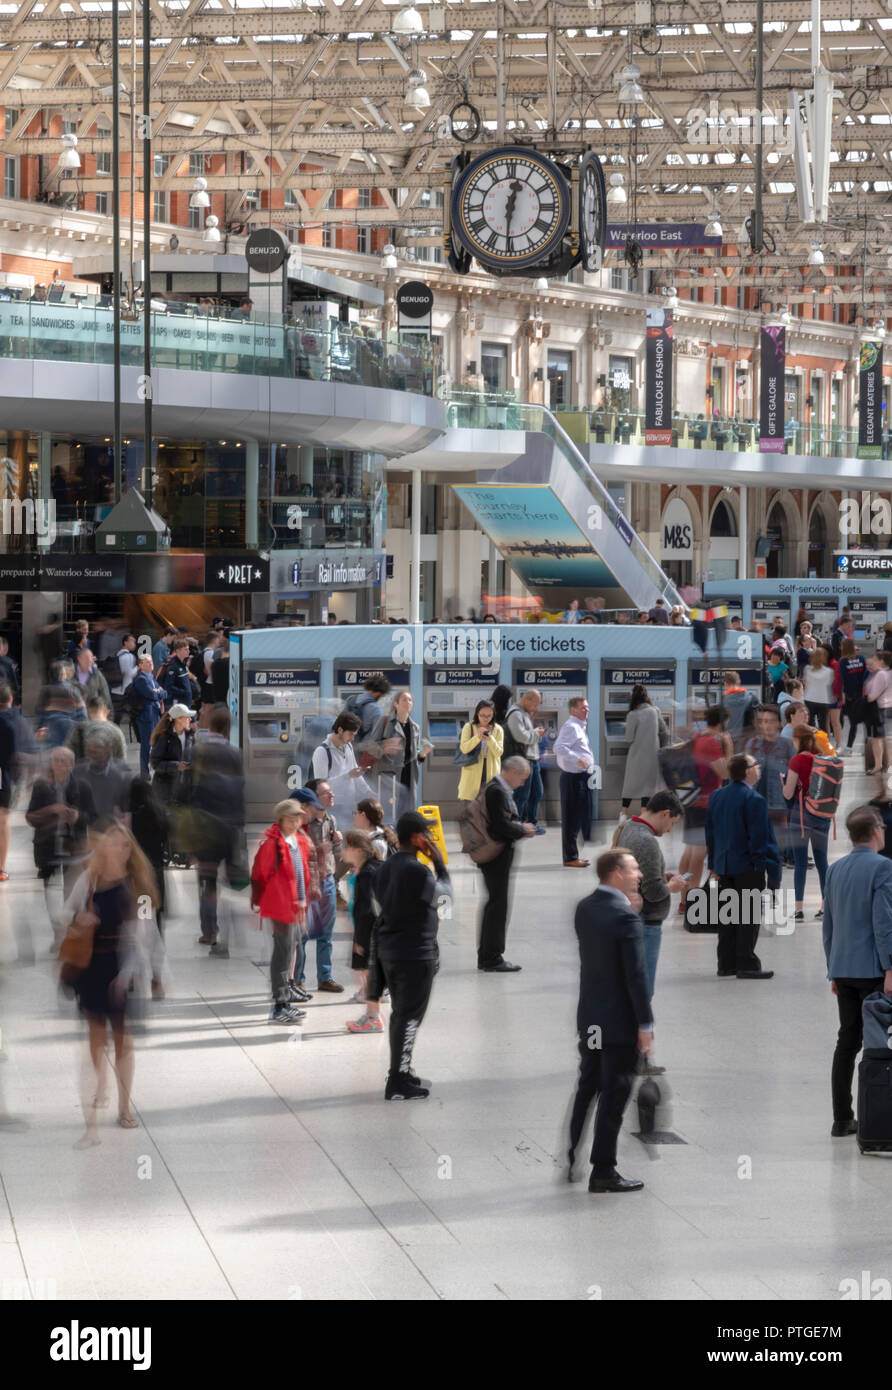 Blurry passengers waiting for their trains at Waterloo Station in London. All shot from the balcony above the concourse. Stock Photo